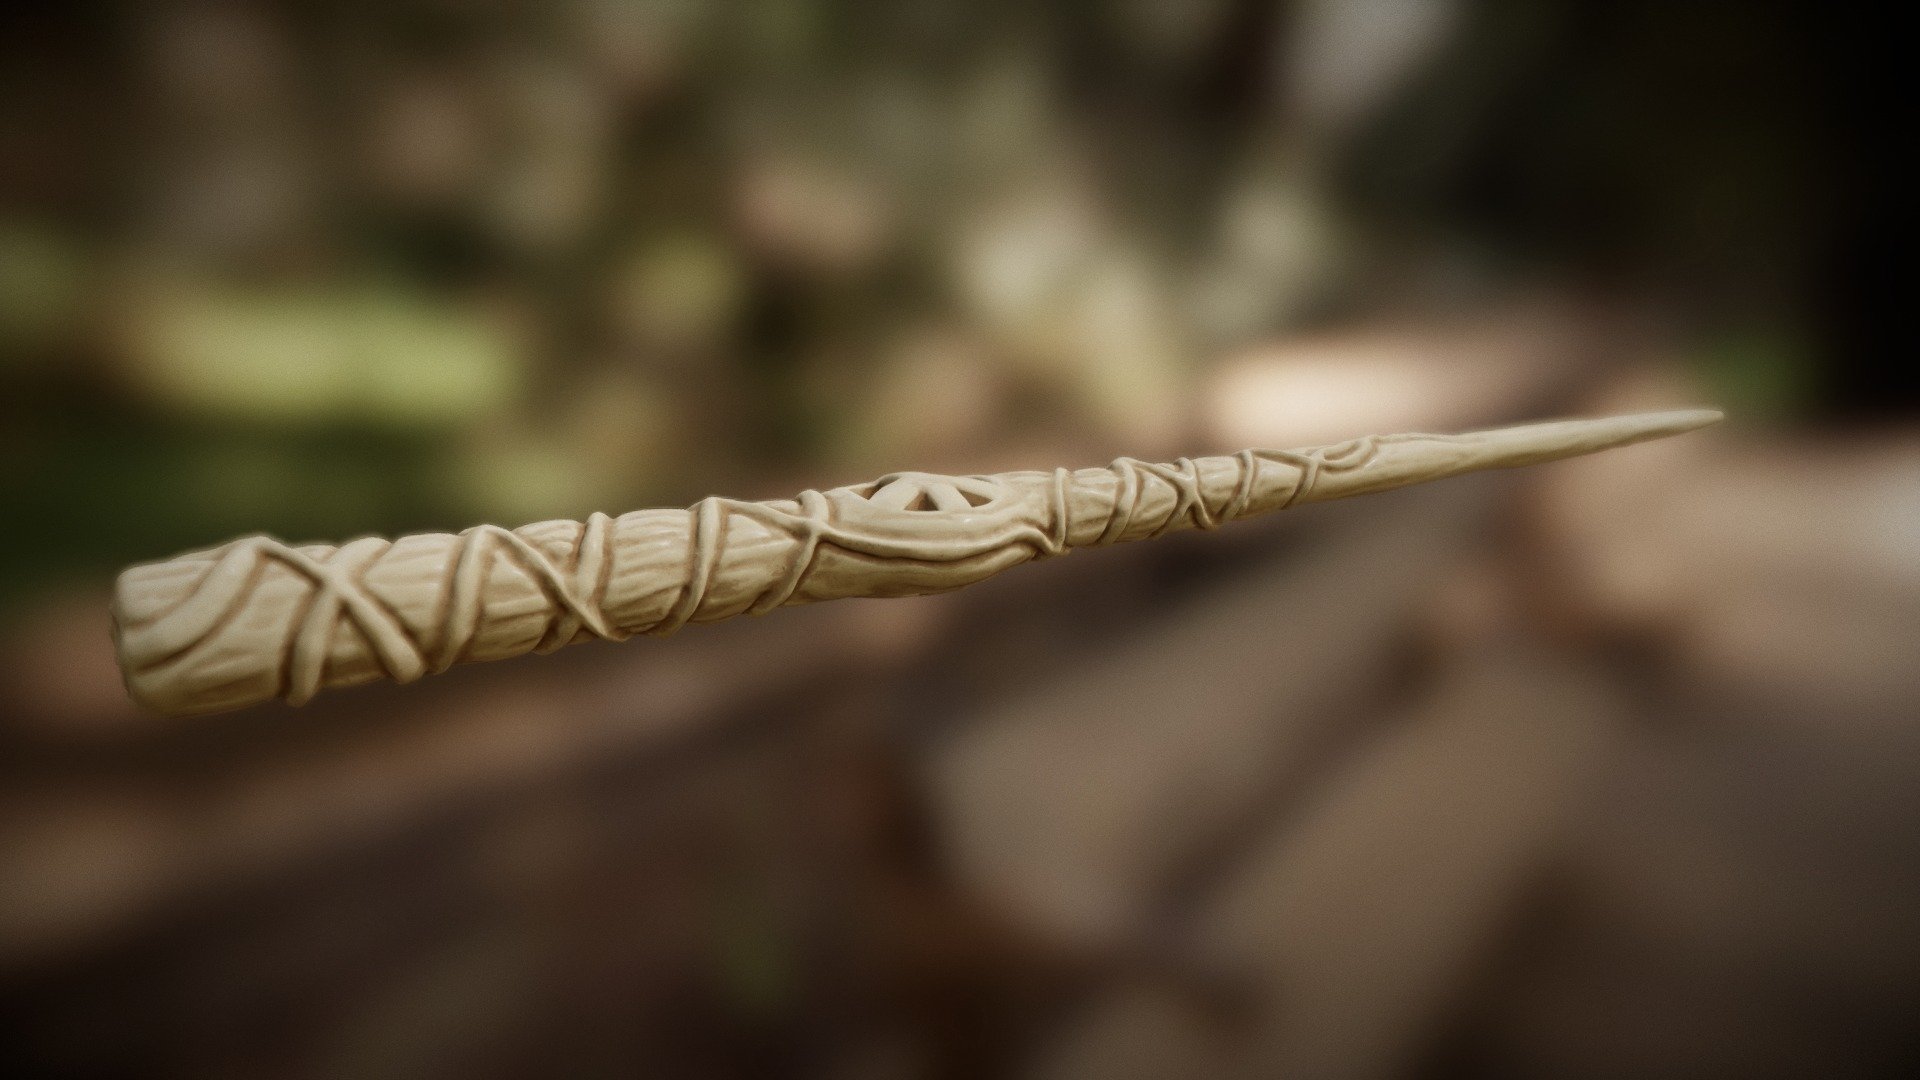 Magic wand designed for my girl with her help.
She asked me for design a magic wand that represents her and the symbol of peace is what most represents her.
Is made of phoenix bone and has an incredible power to control both life and death. Of course, only she can control this wand.

Modeled and rendered with Blender Cycles 3d model